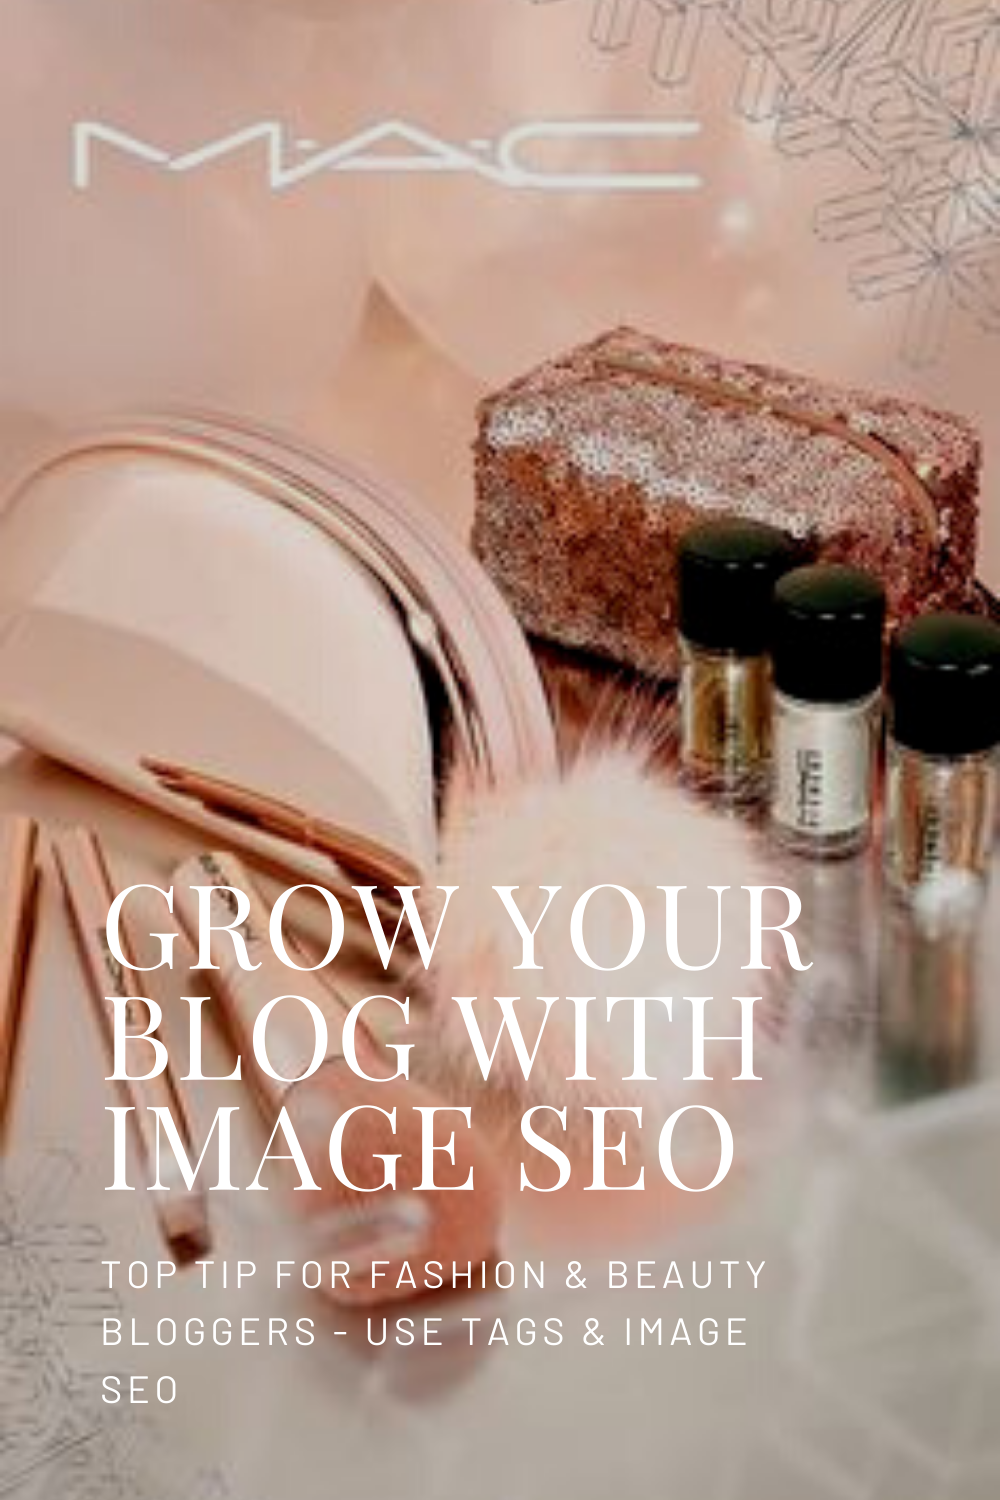 TOP TIP FOR FASHION &amp; BEAUTY BLOGGERS - USE TAGS &amp; IMAGE SEO